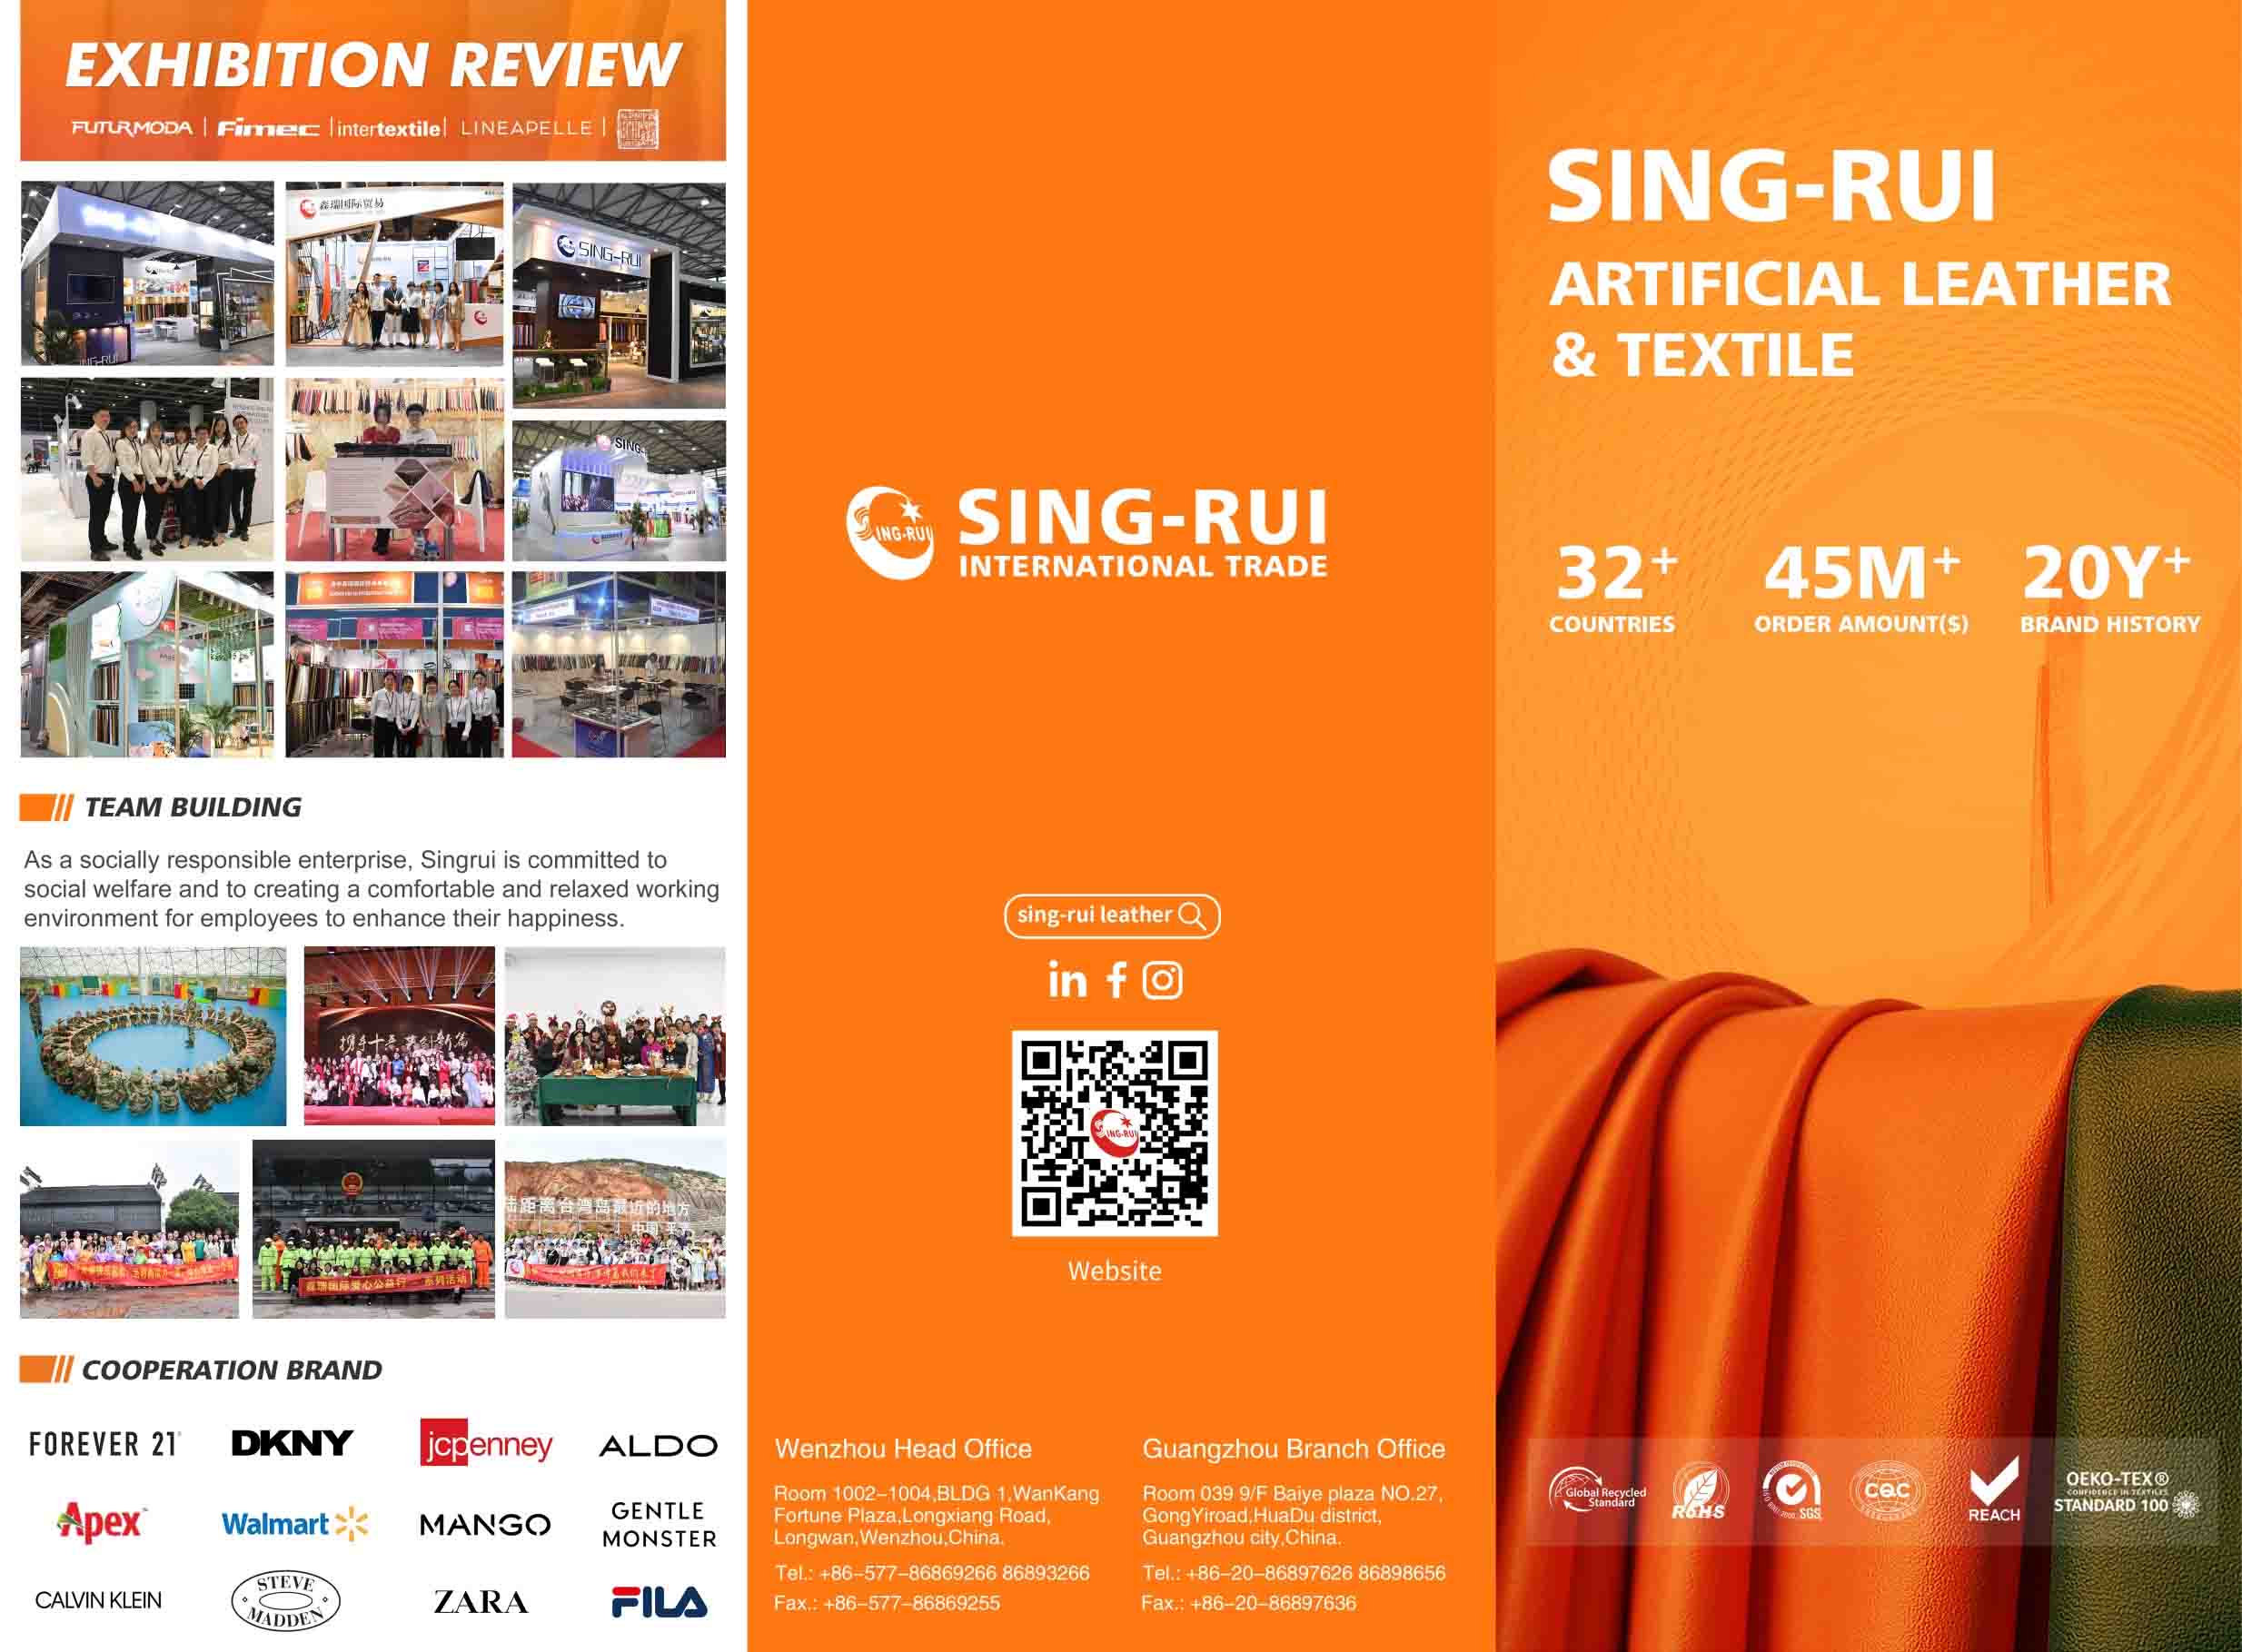 This is Singrui leather, a global manufacturer of synthetic leather & microfiber & textile in China